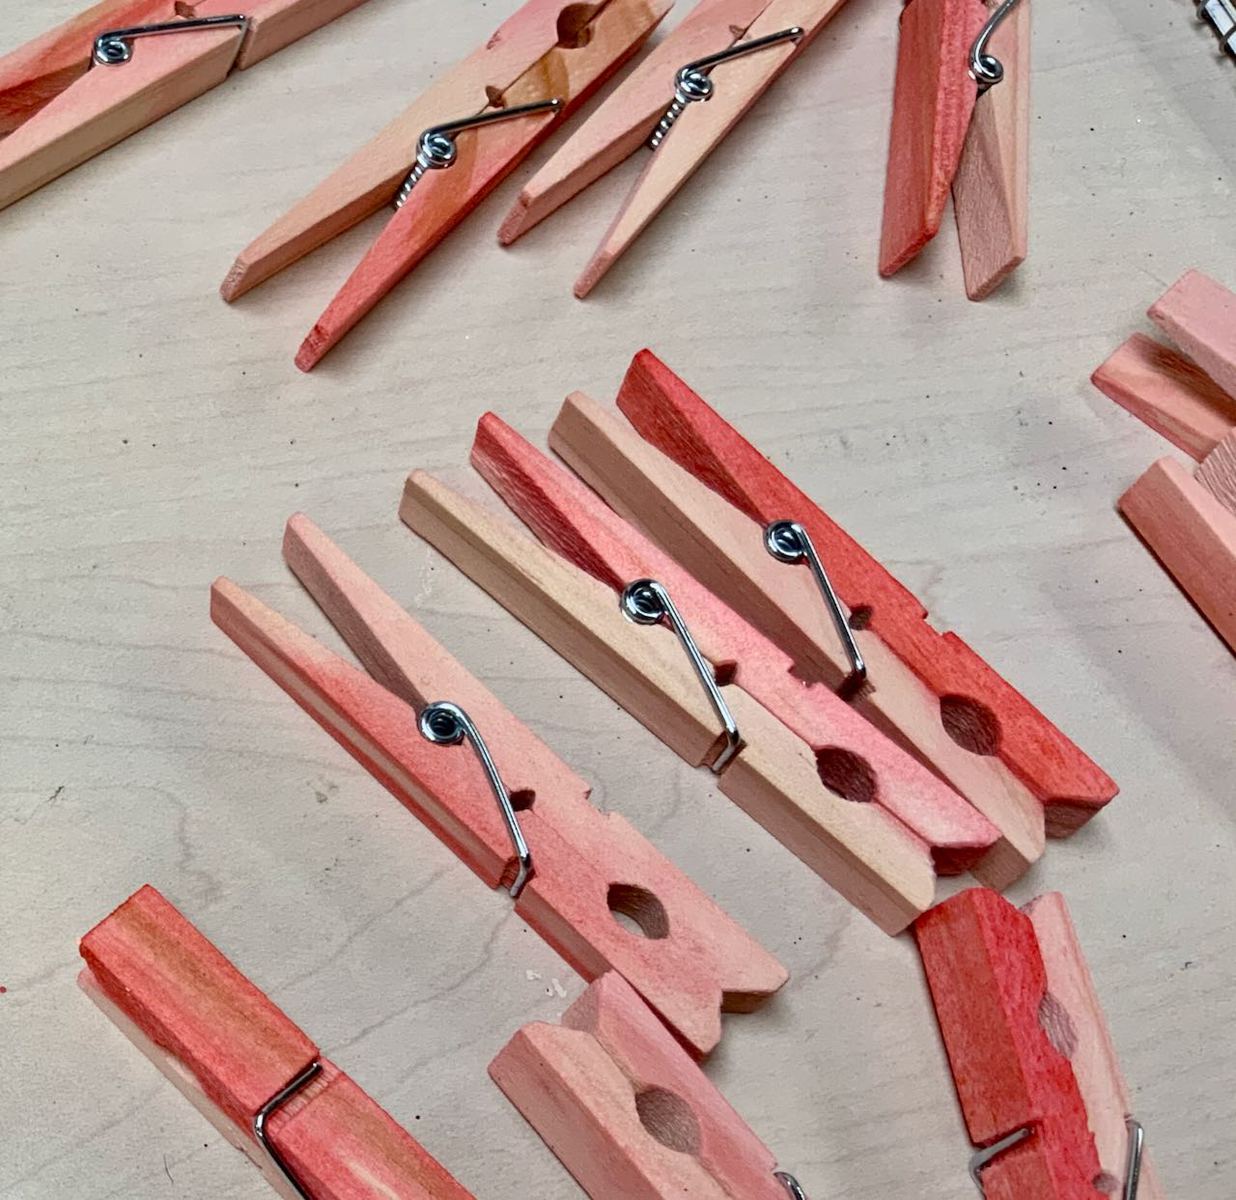 A bunch of dried, dyed clothespins laying on table to show the variation in color to expect